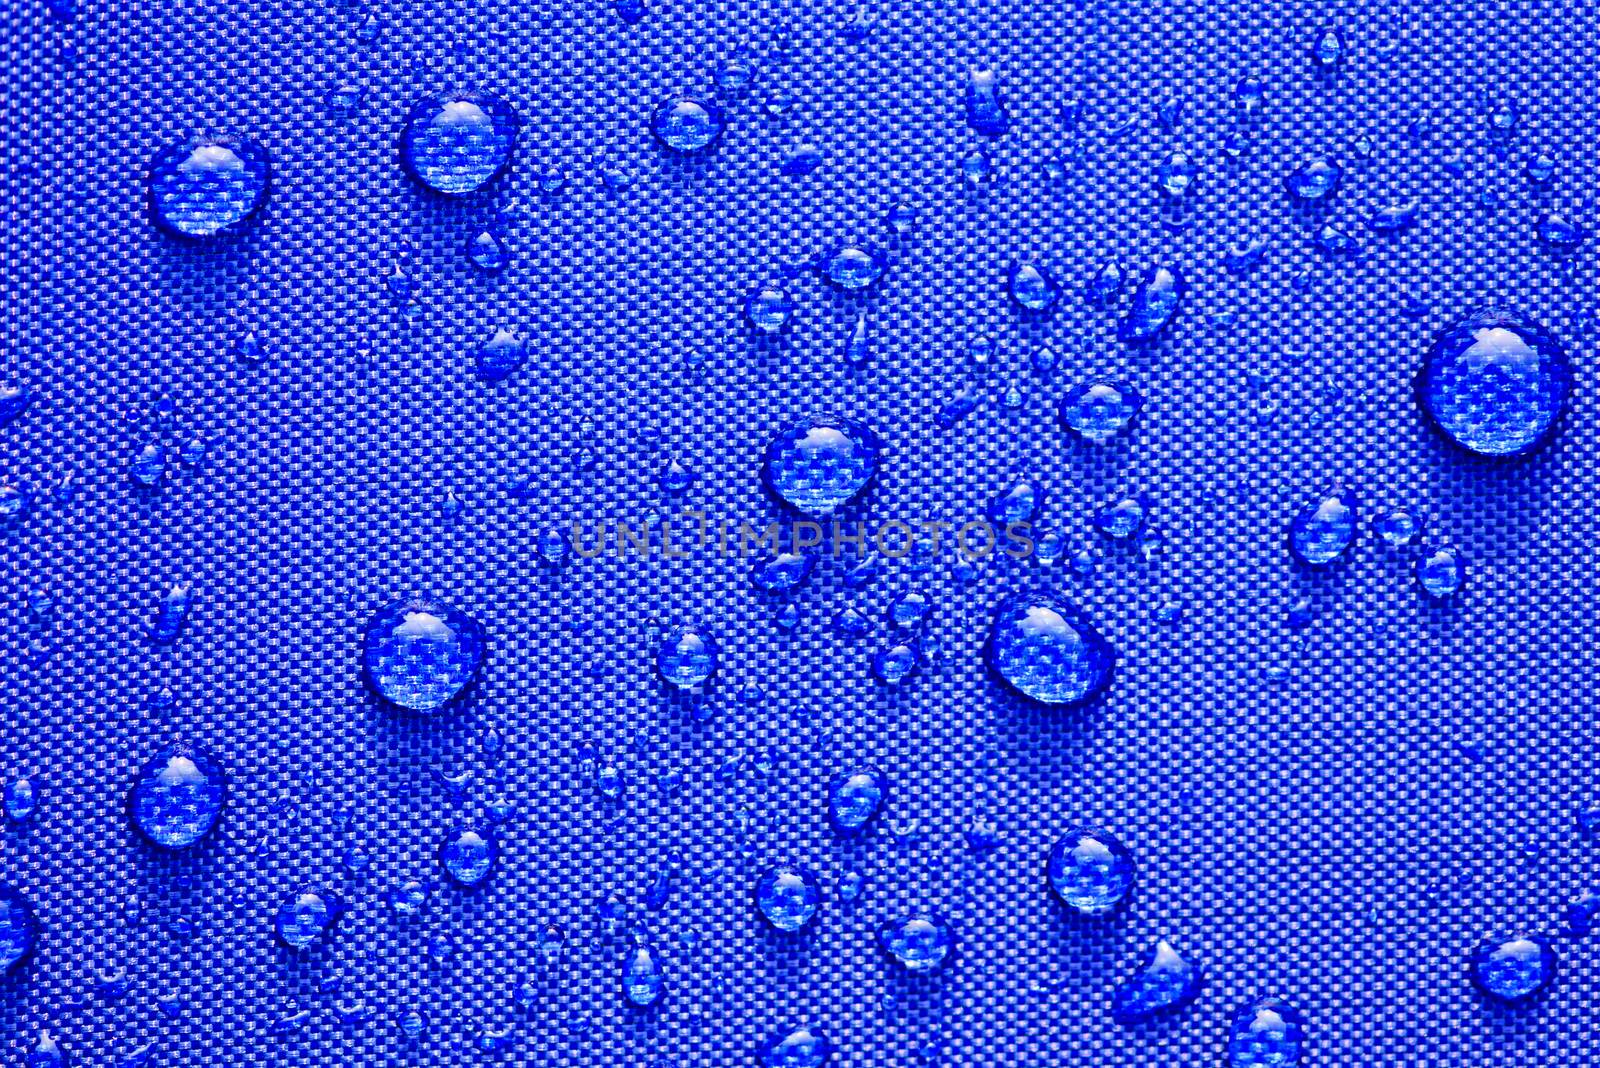 Close up Water drops pattern over a blue waterproof cloth backgr by spukkato